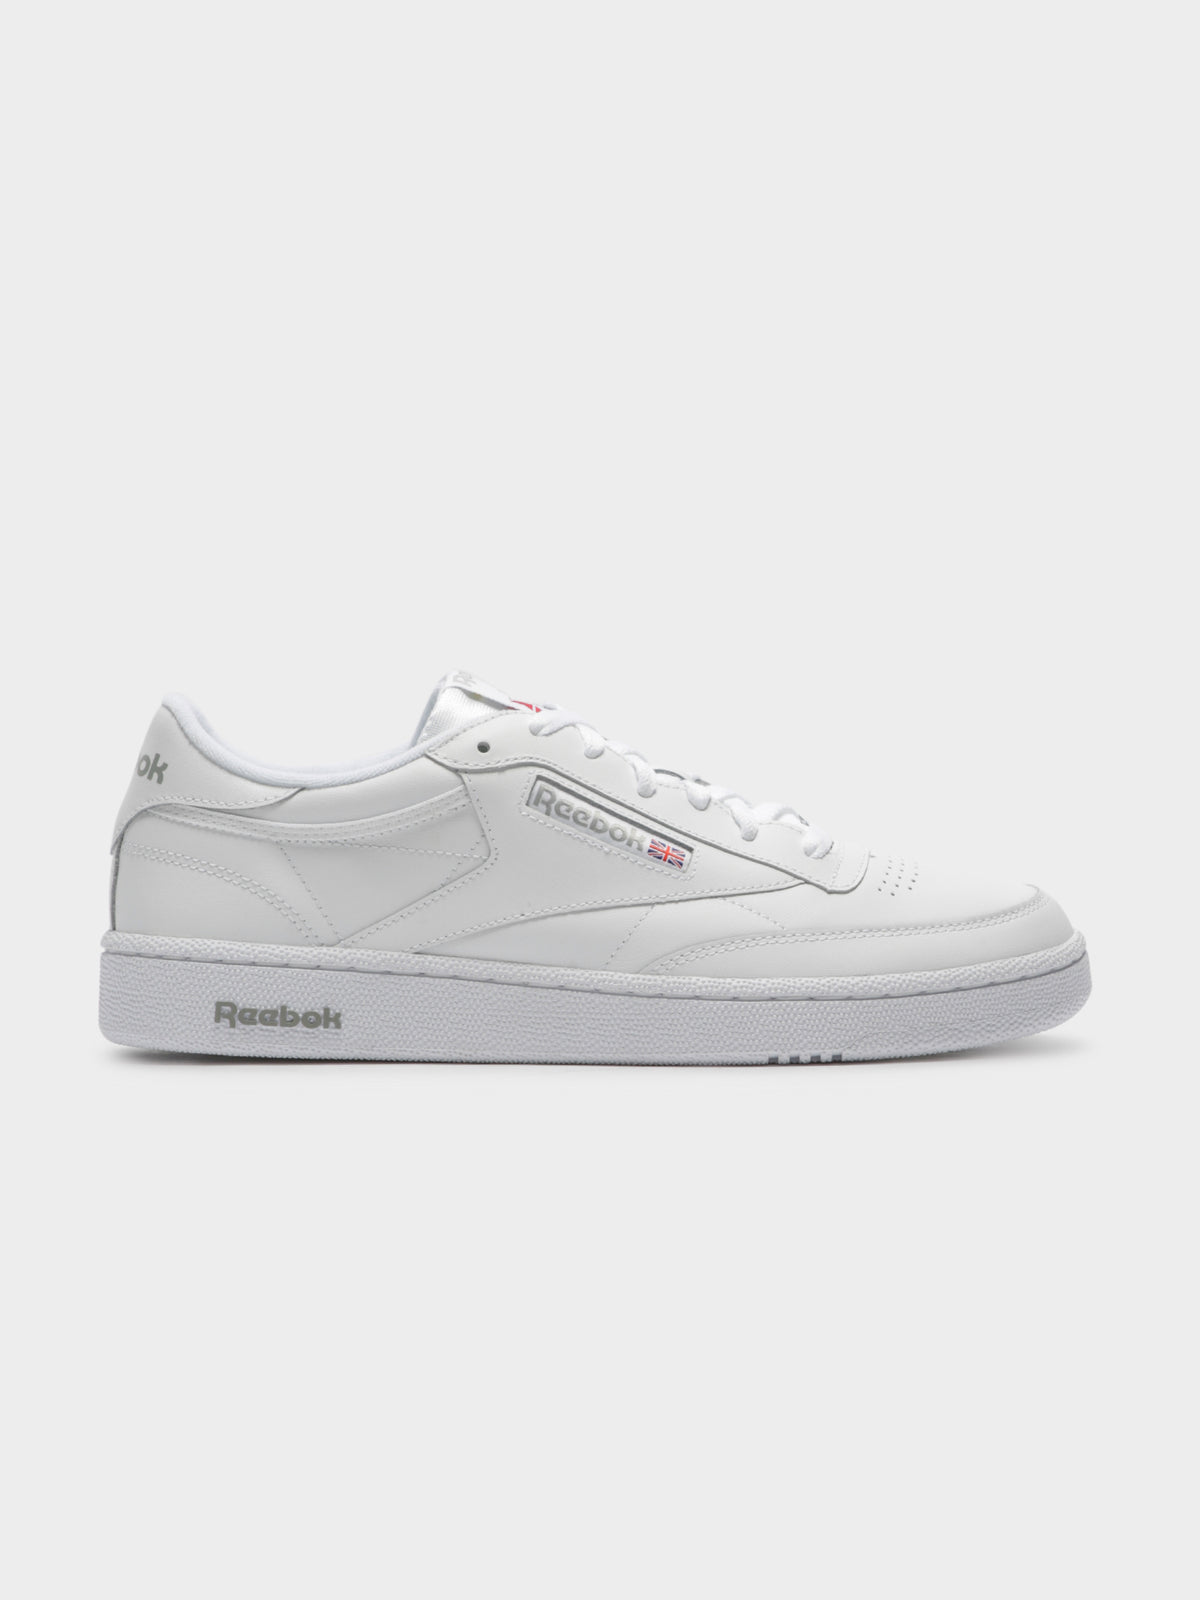 Unisex Club C 85 Sneakers in White &amp; Grey Leather